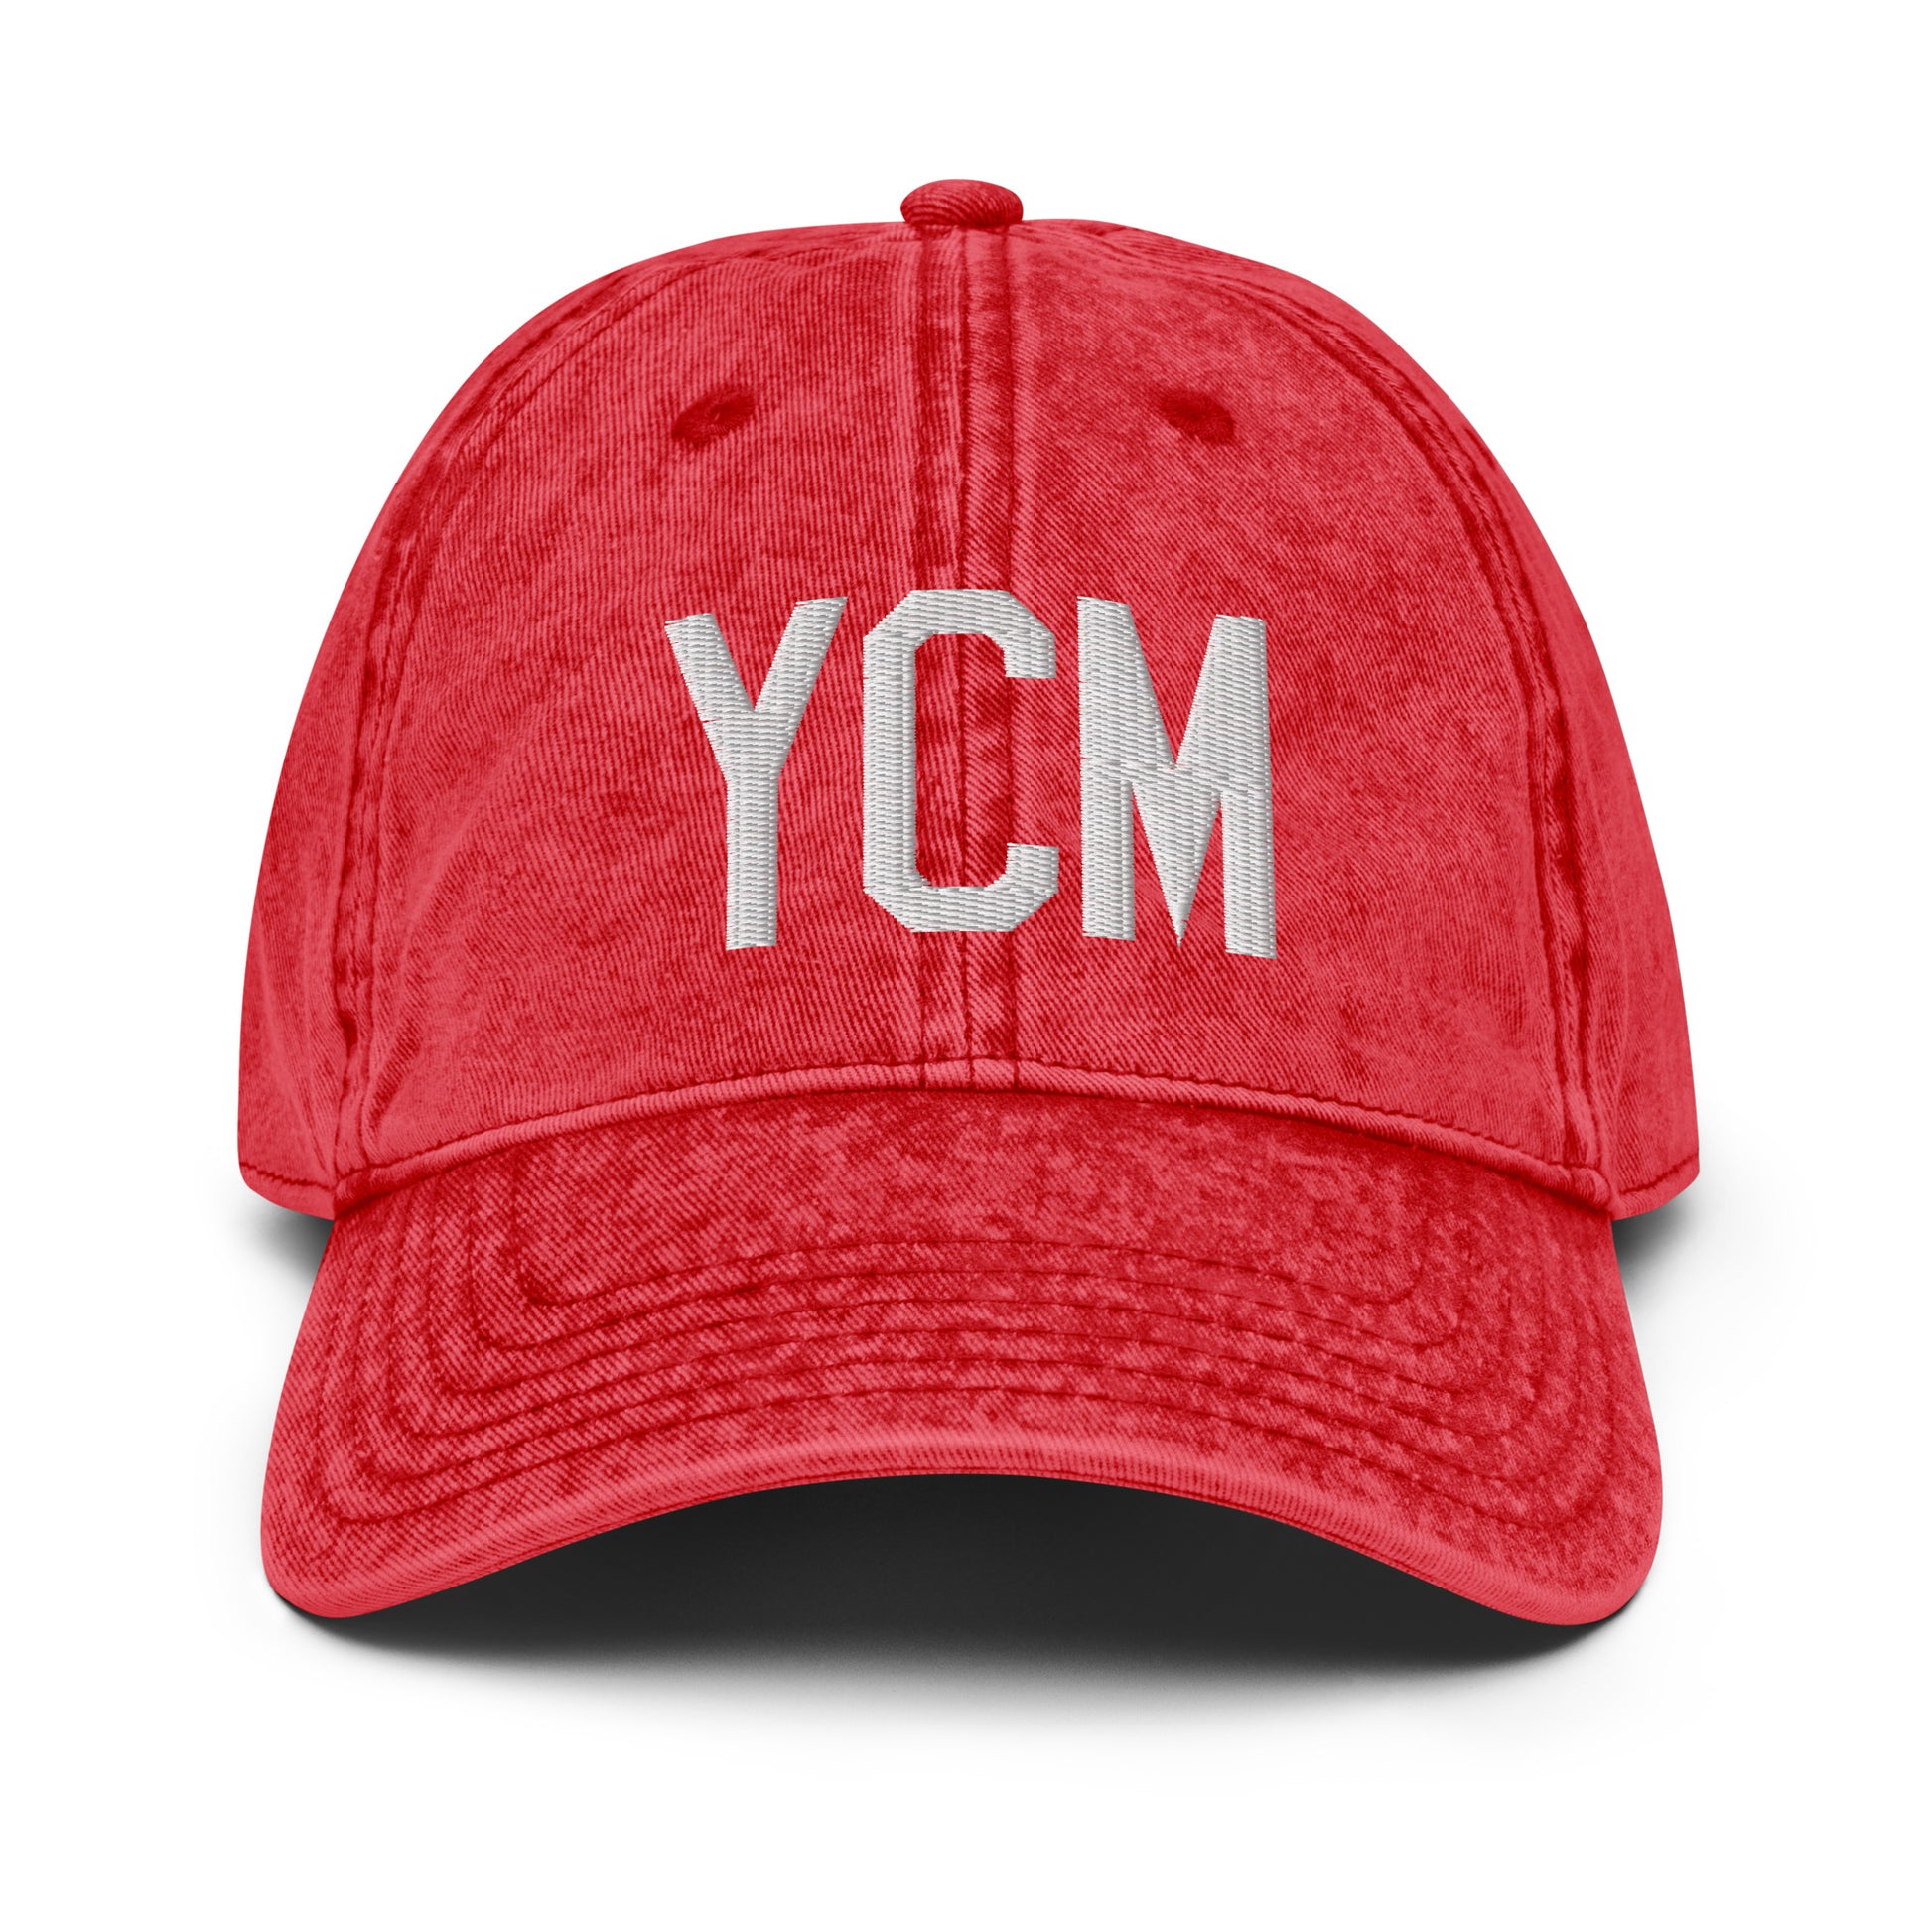 Airport Code Twill Cap - White • YCM St. Catharines • YHM Designs - Image 22